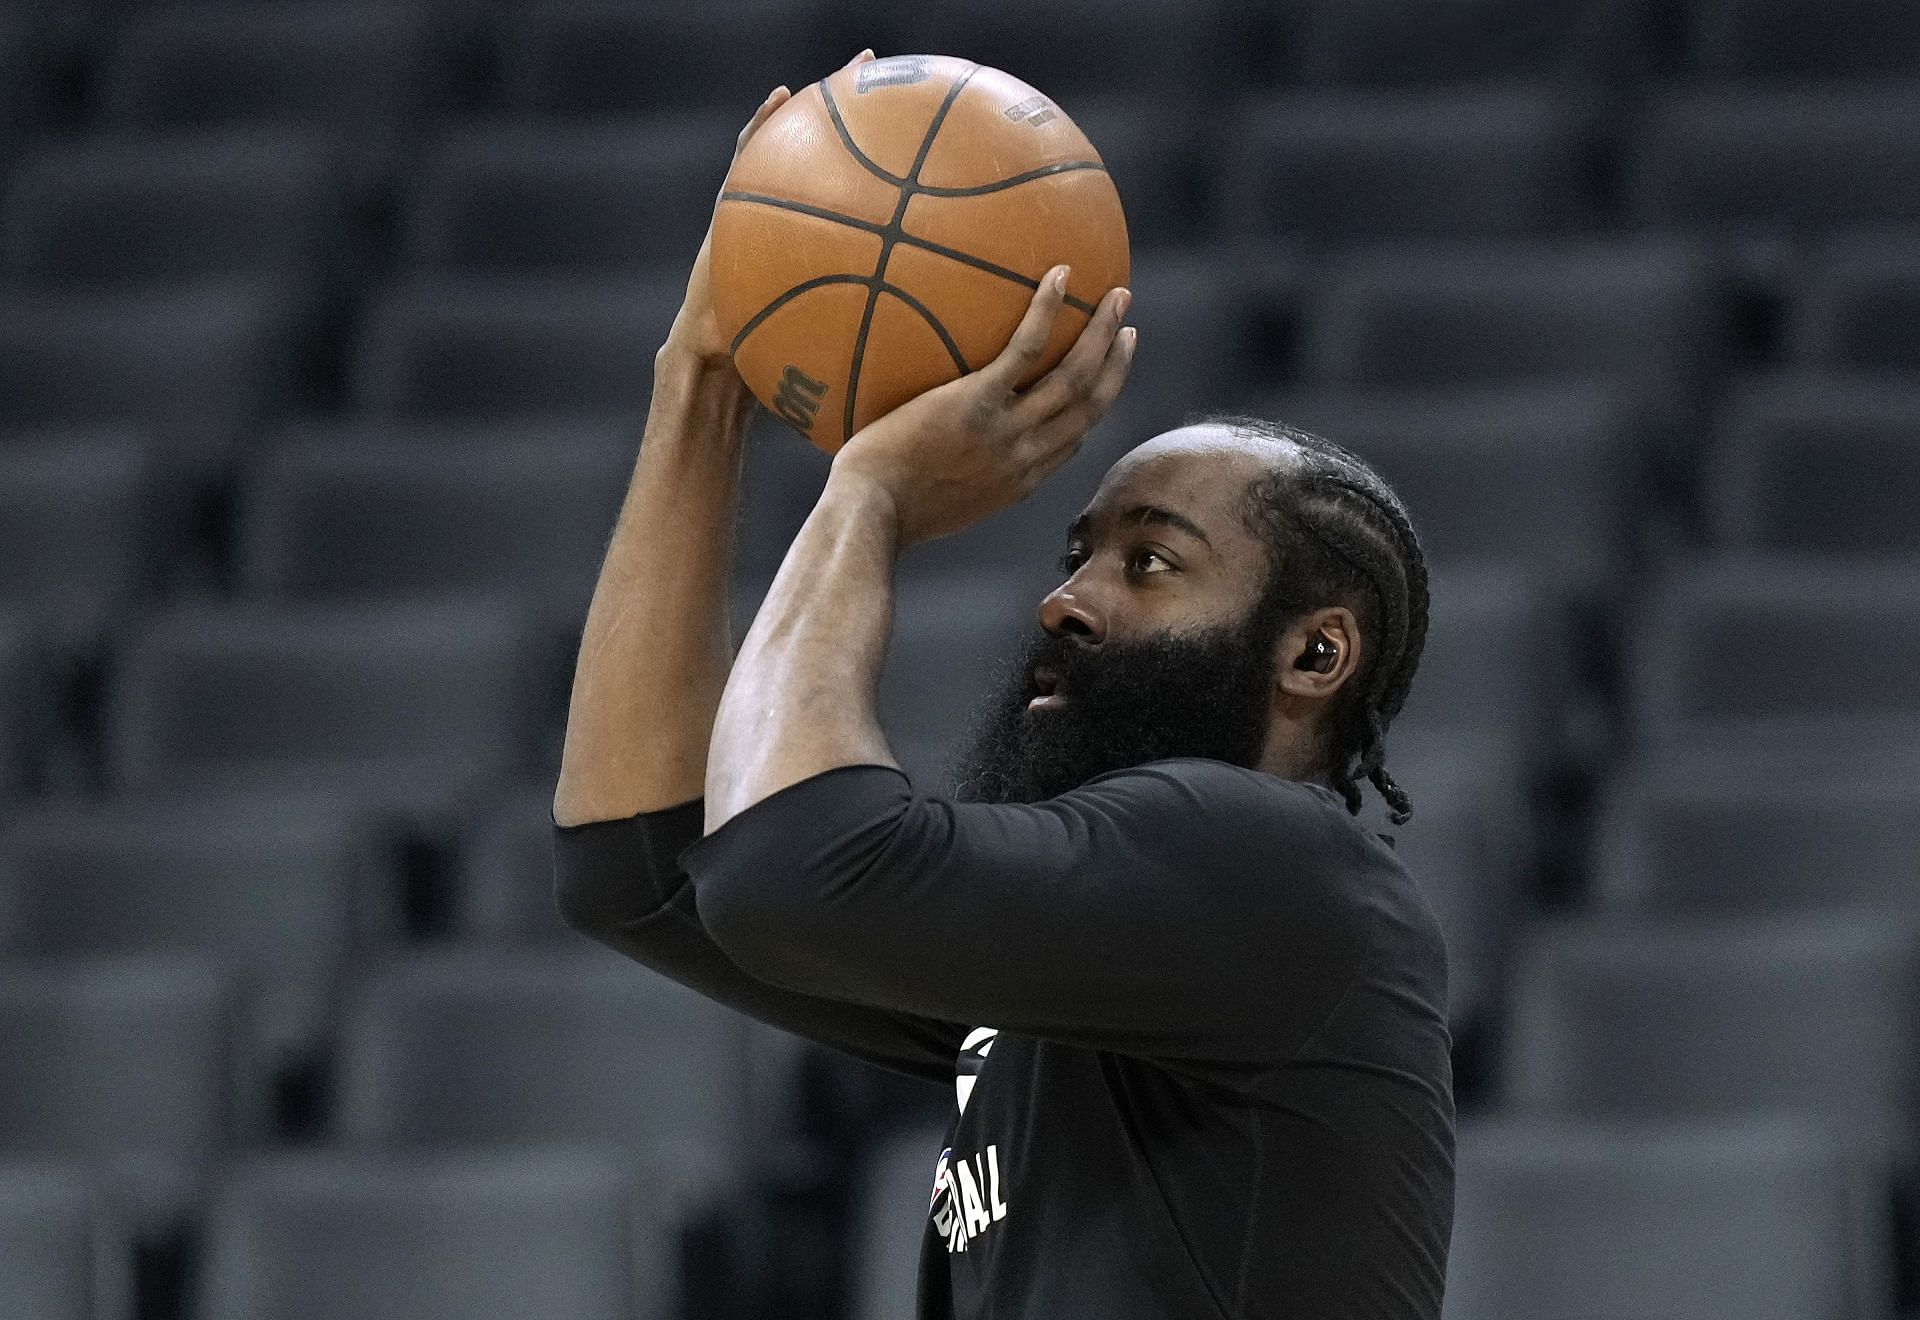 James Harden of the Brooklyn Nets shoots during a warm-up session.